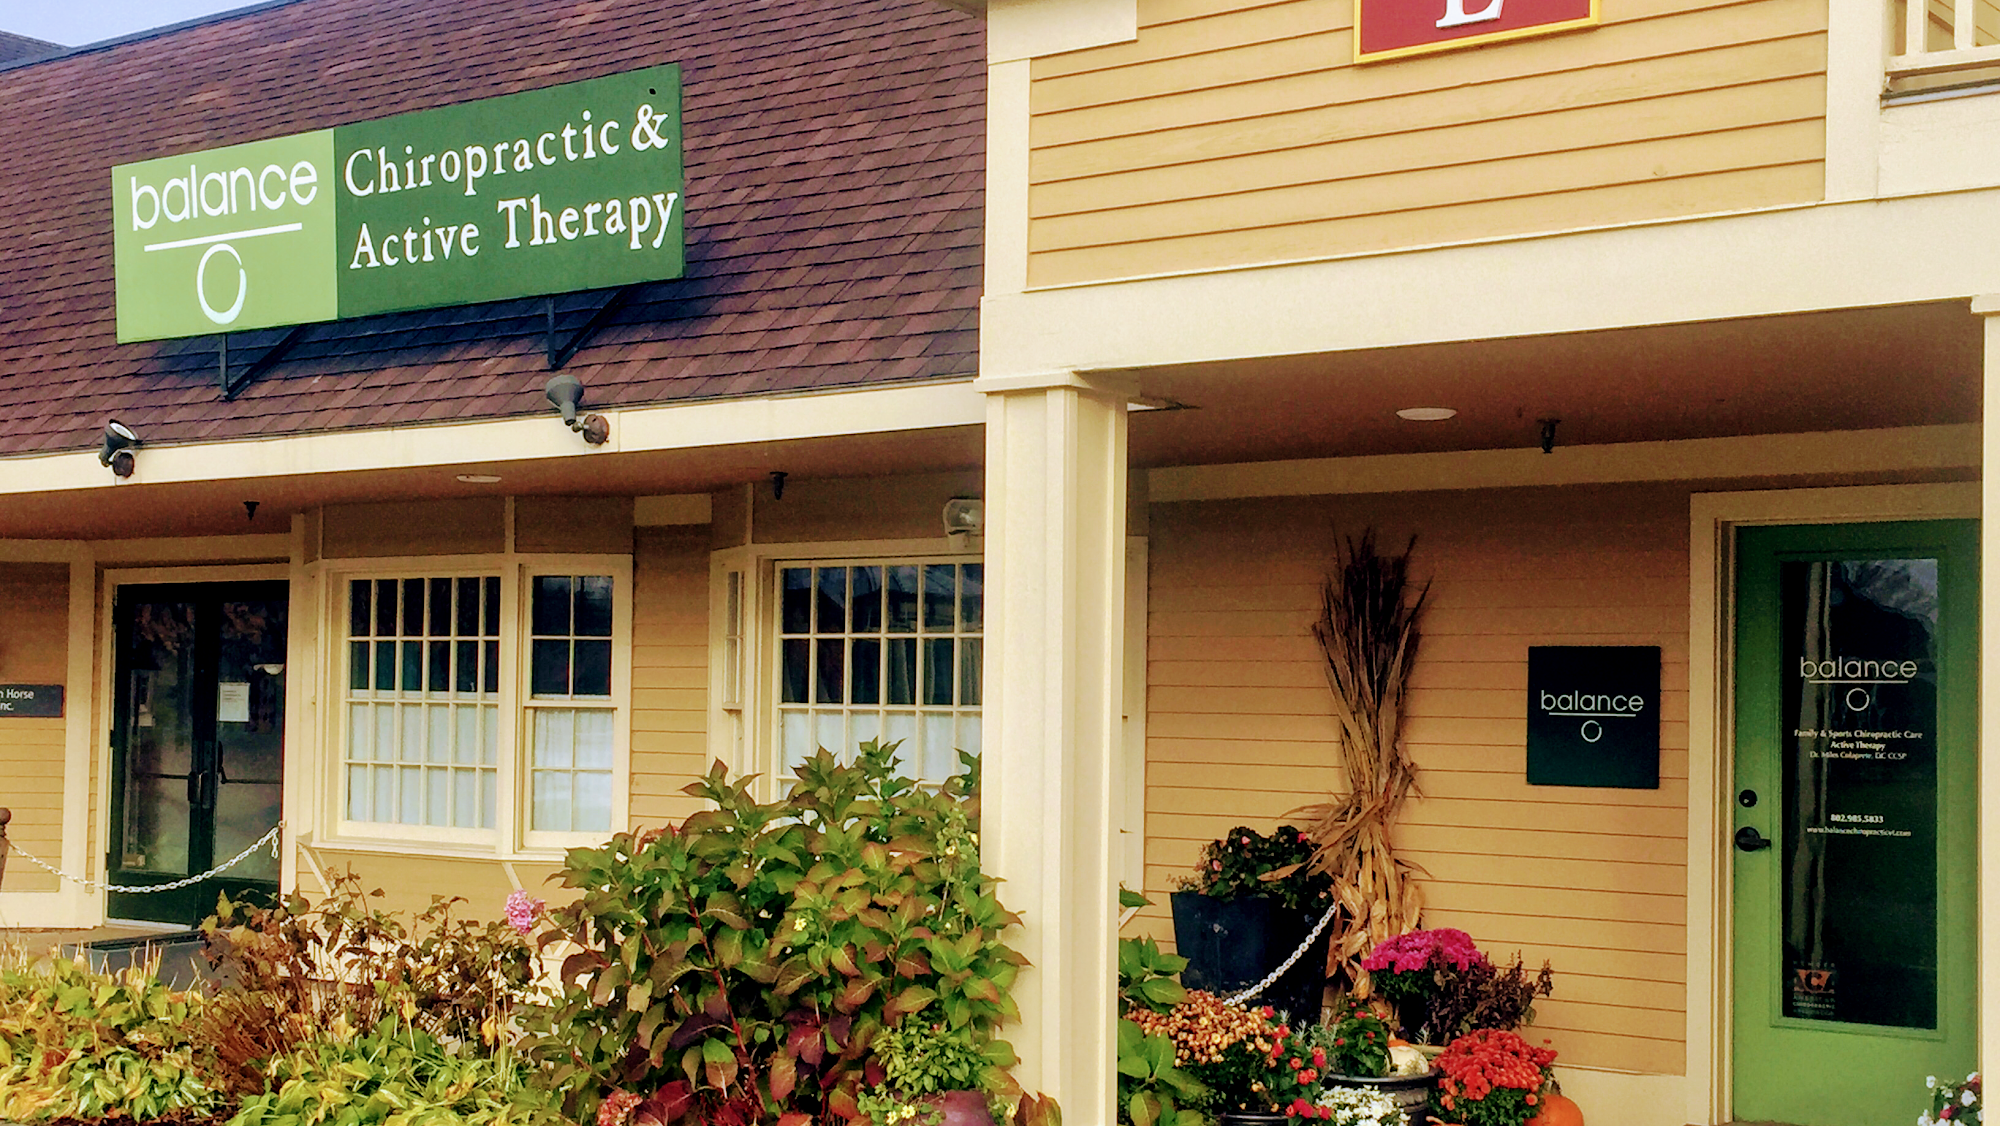 Balance Chiropractic & Active Therapy